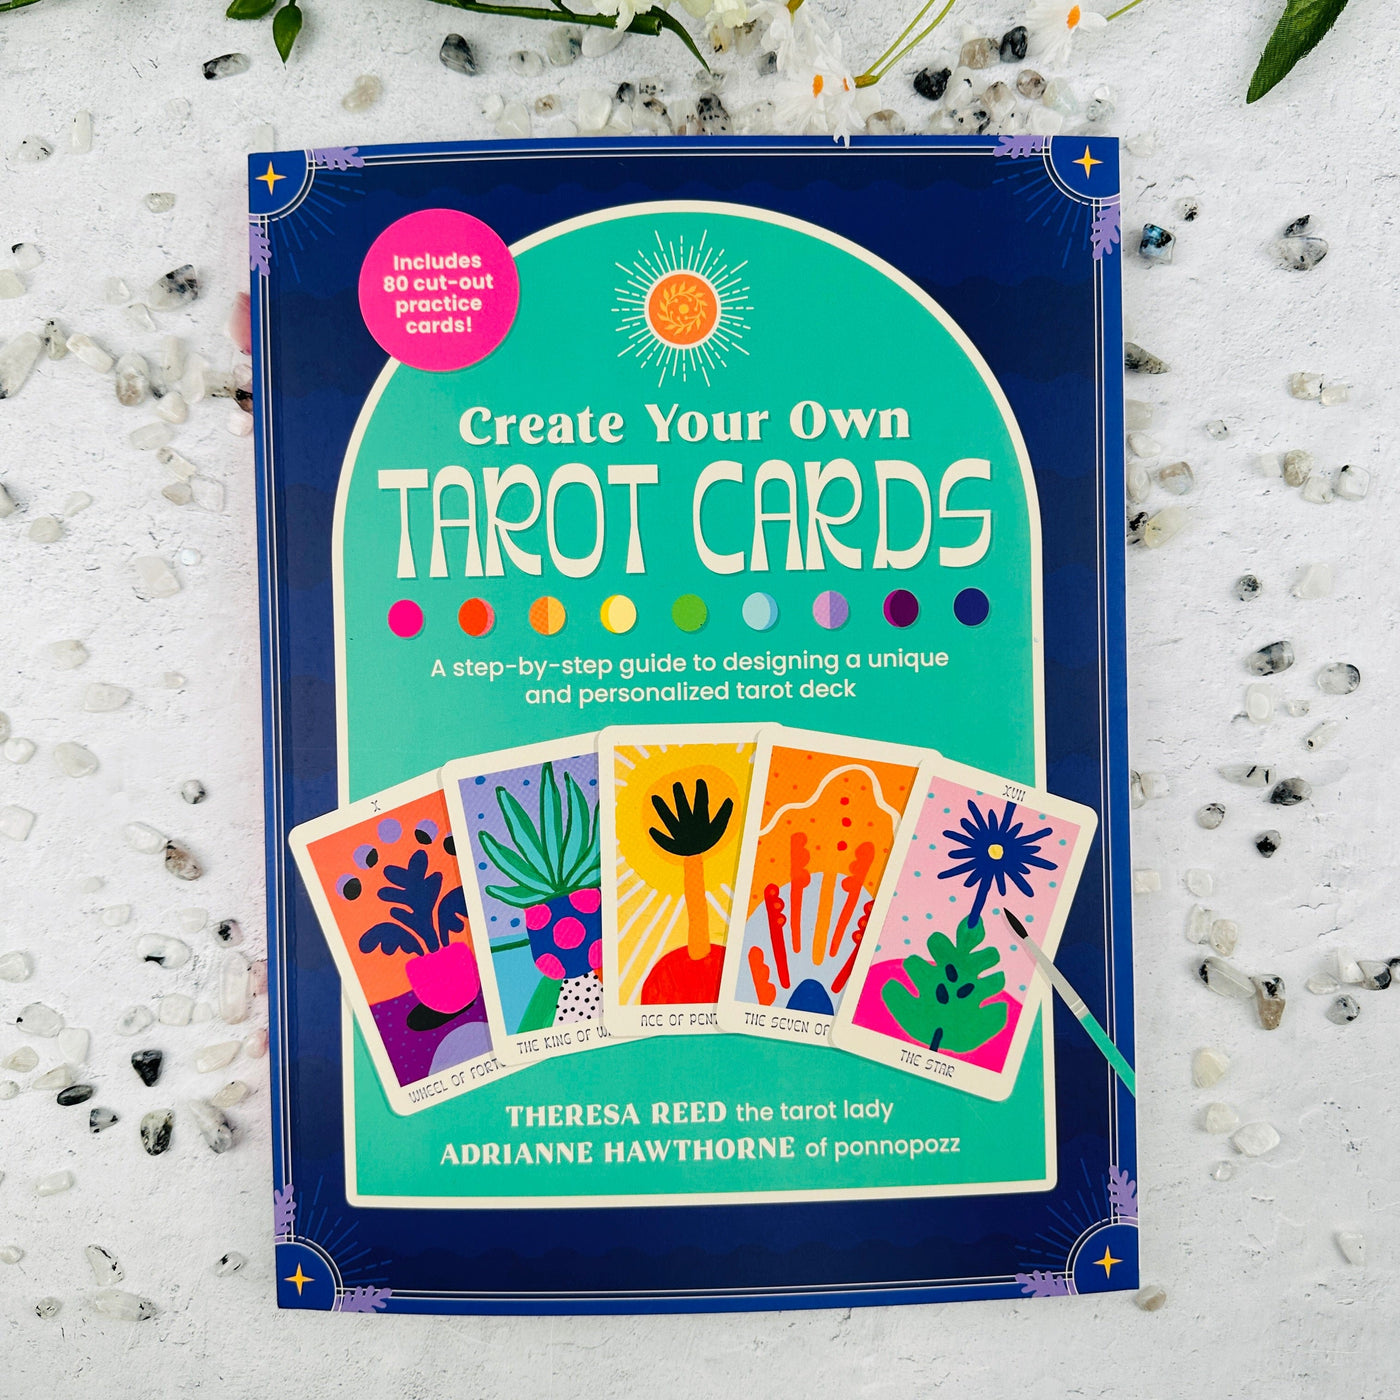 Create Your Own Tarot Cards: A step-by-step guide to designing a unique and personalized tarot deck-Includes 80 cut-out practice cards!